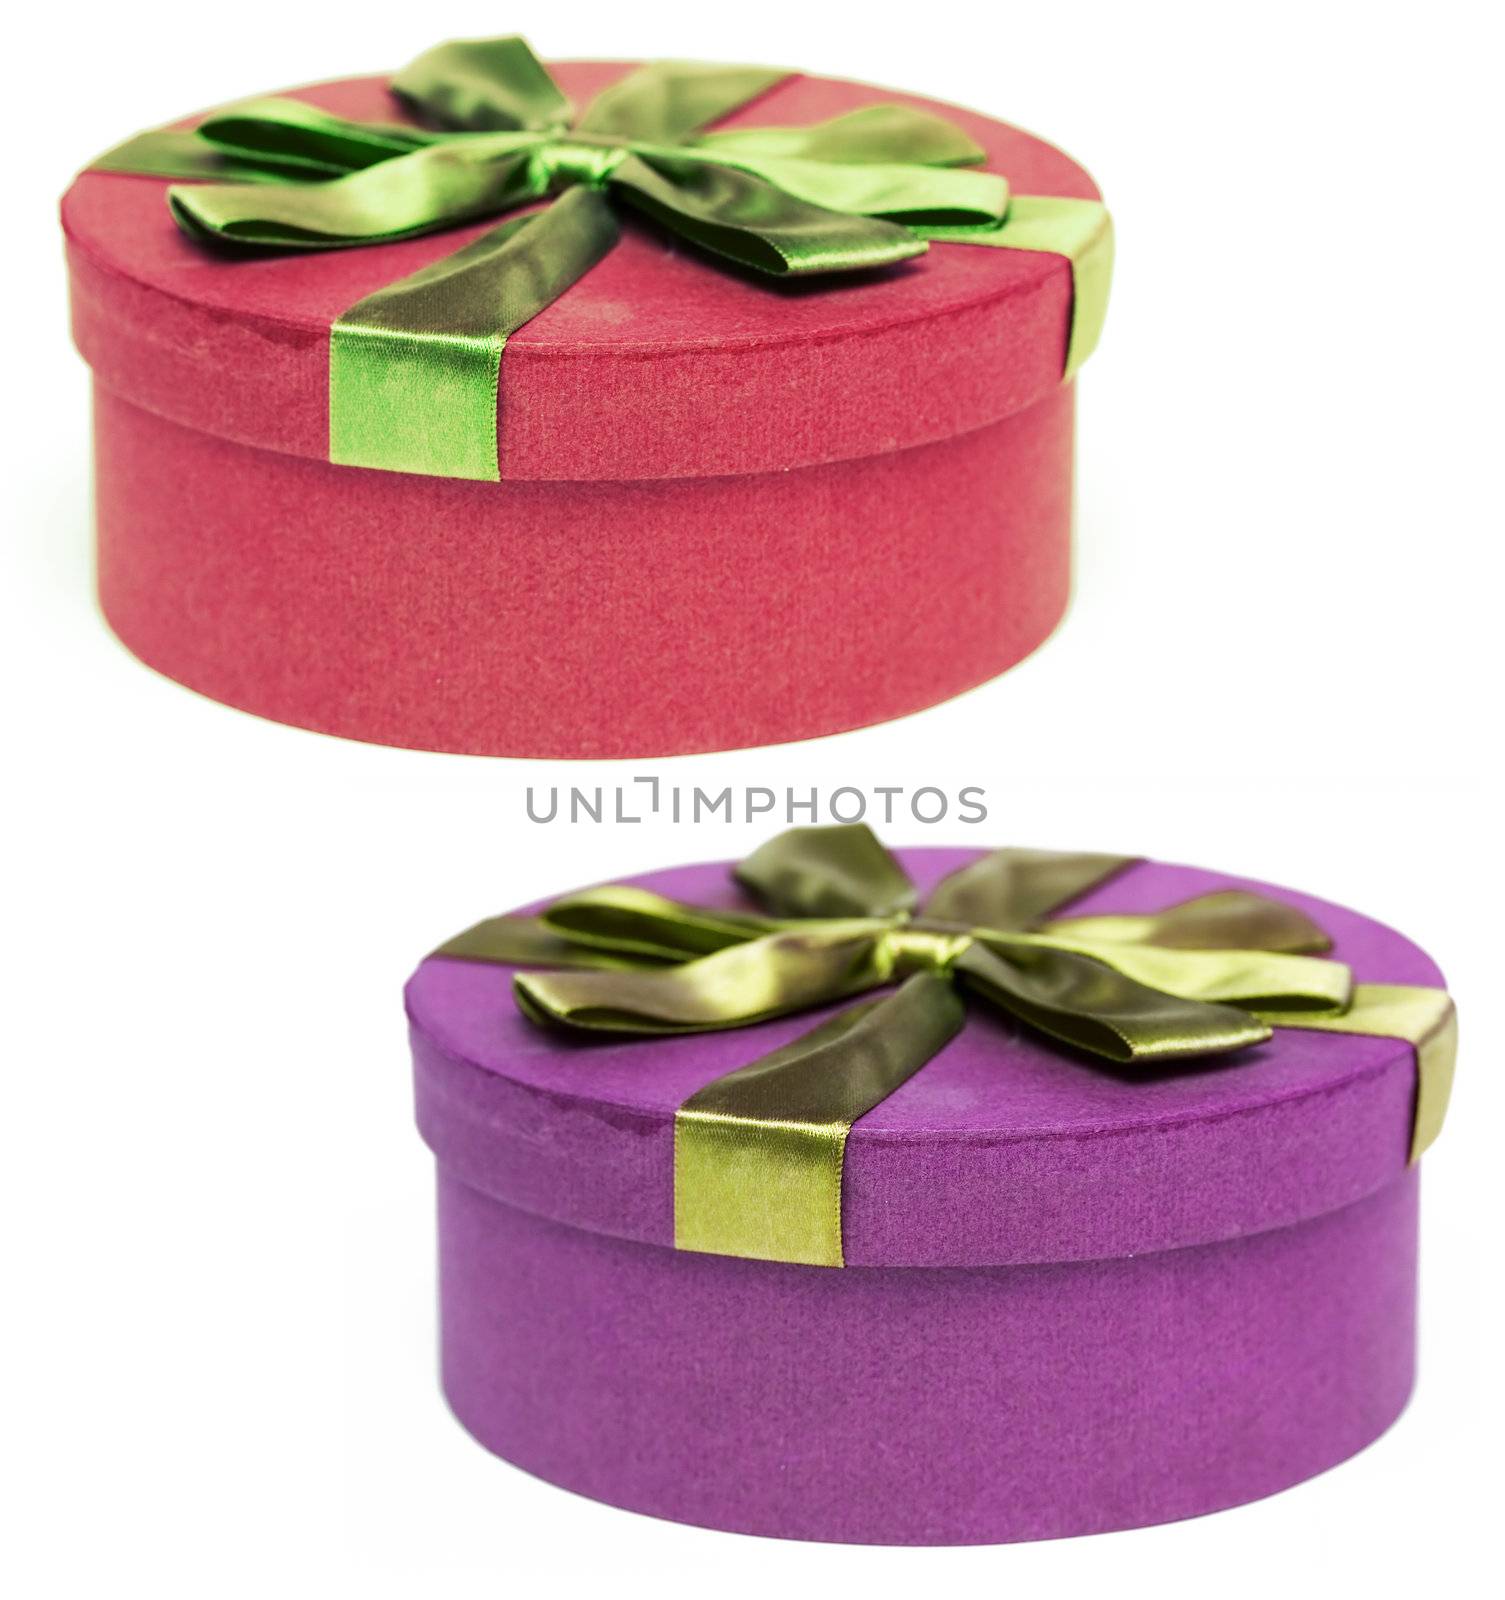 Two round colourful boxes on white